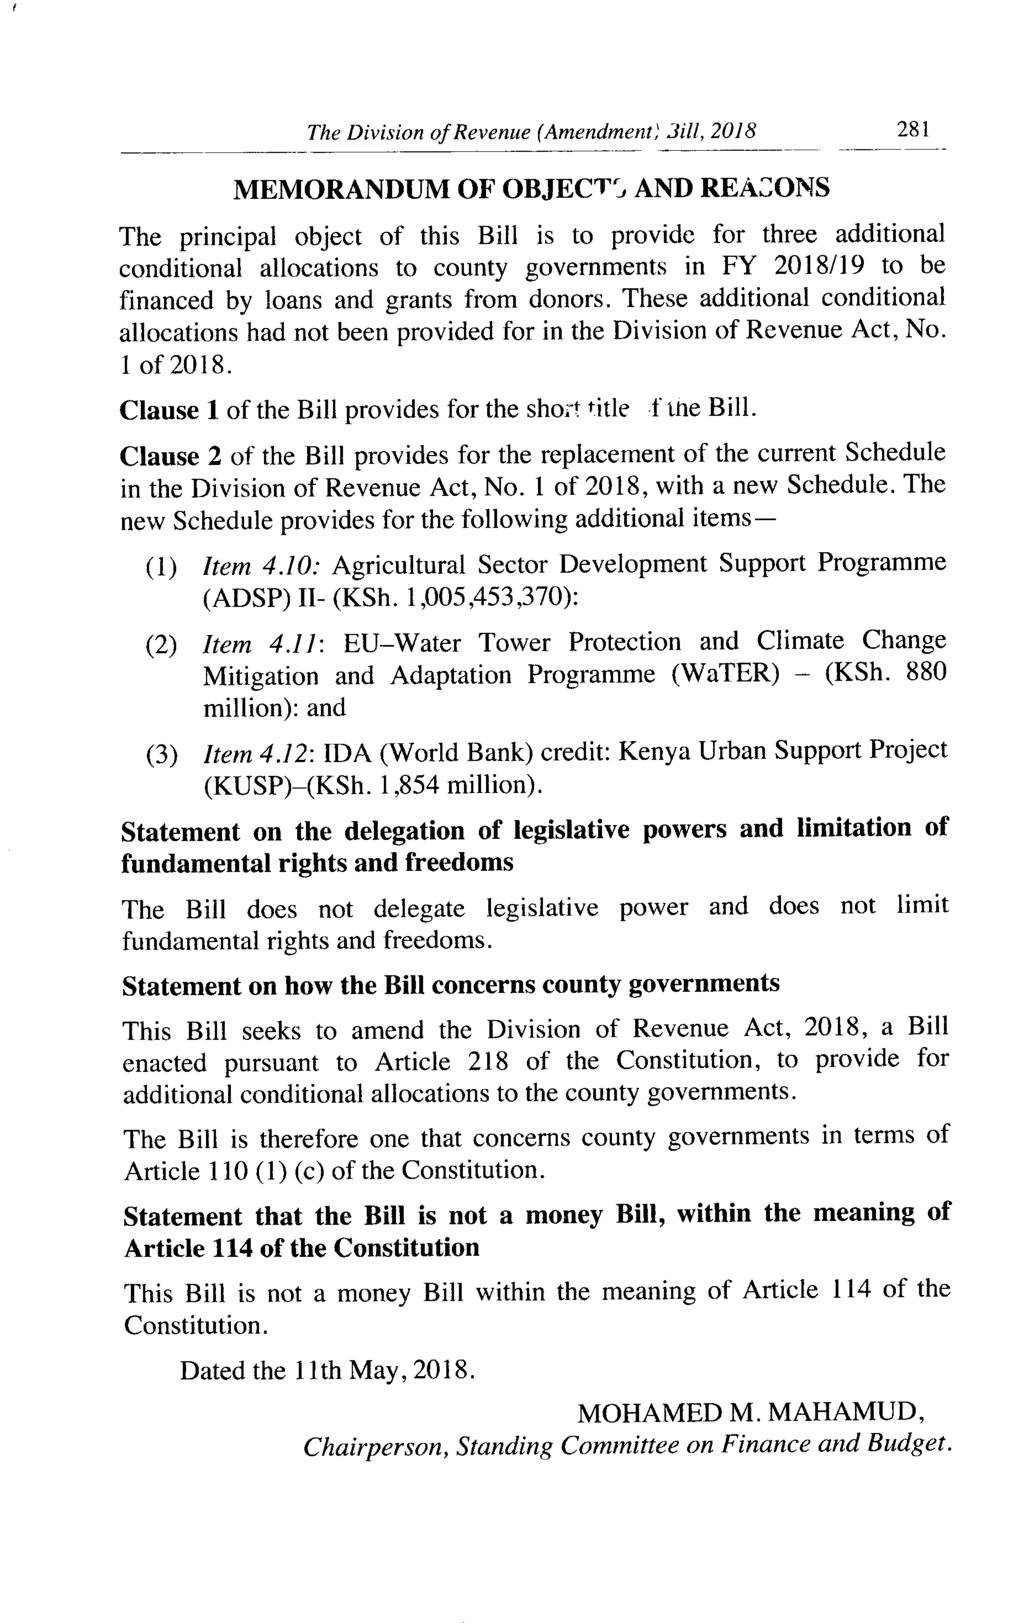 The Division of Revenue (Arnendment, 3i11, 2018 281 MEMORANDUM OF OBJECT AND REASONS The principal object of this Bill is to provide for three additional conditional allocations to county governments